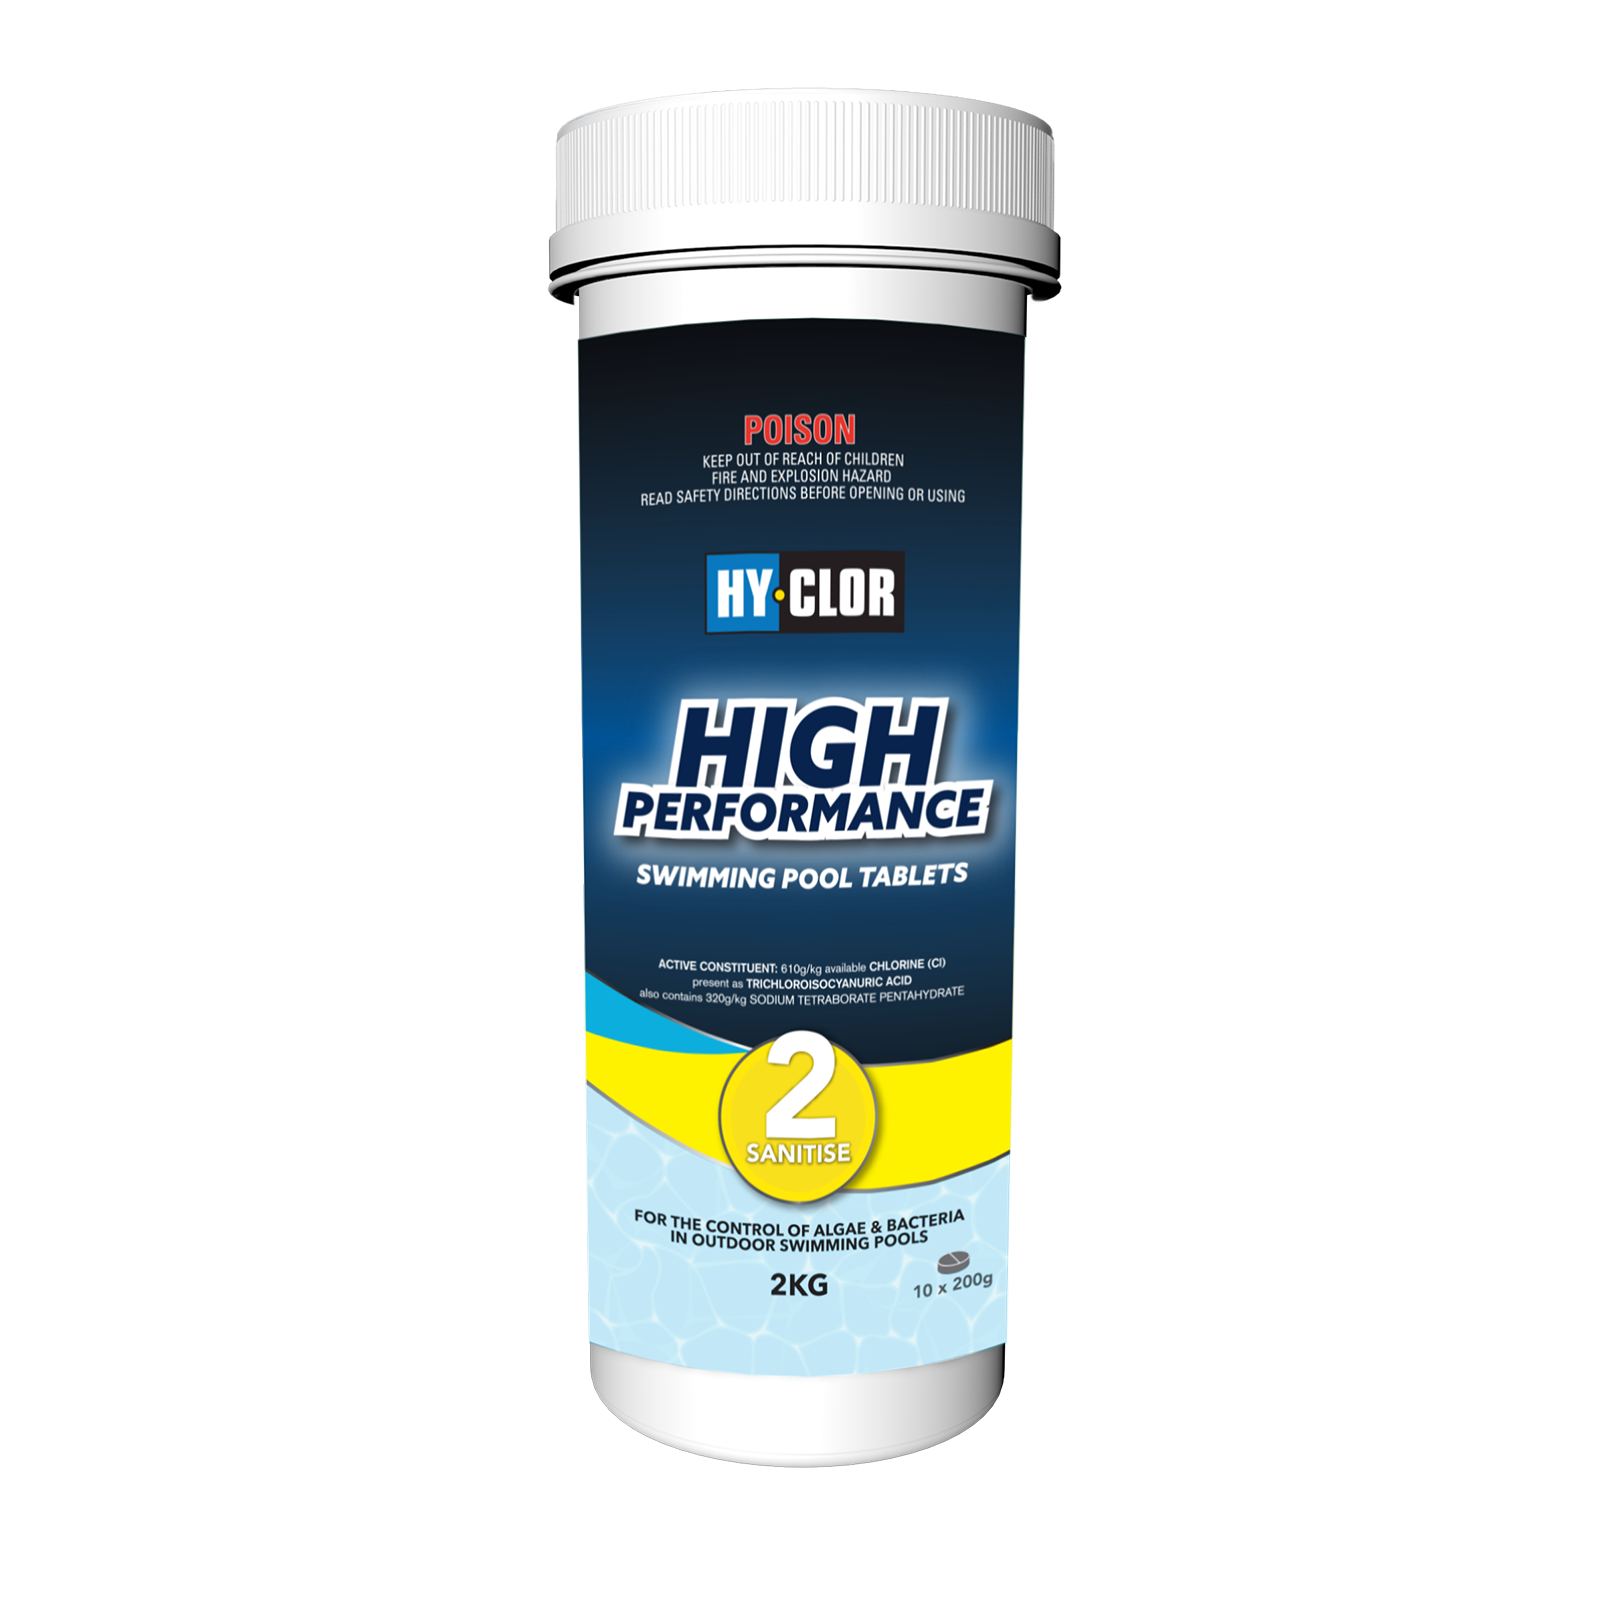 HY-CLOR HIGH PERFORMANCE TABLETS